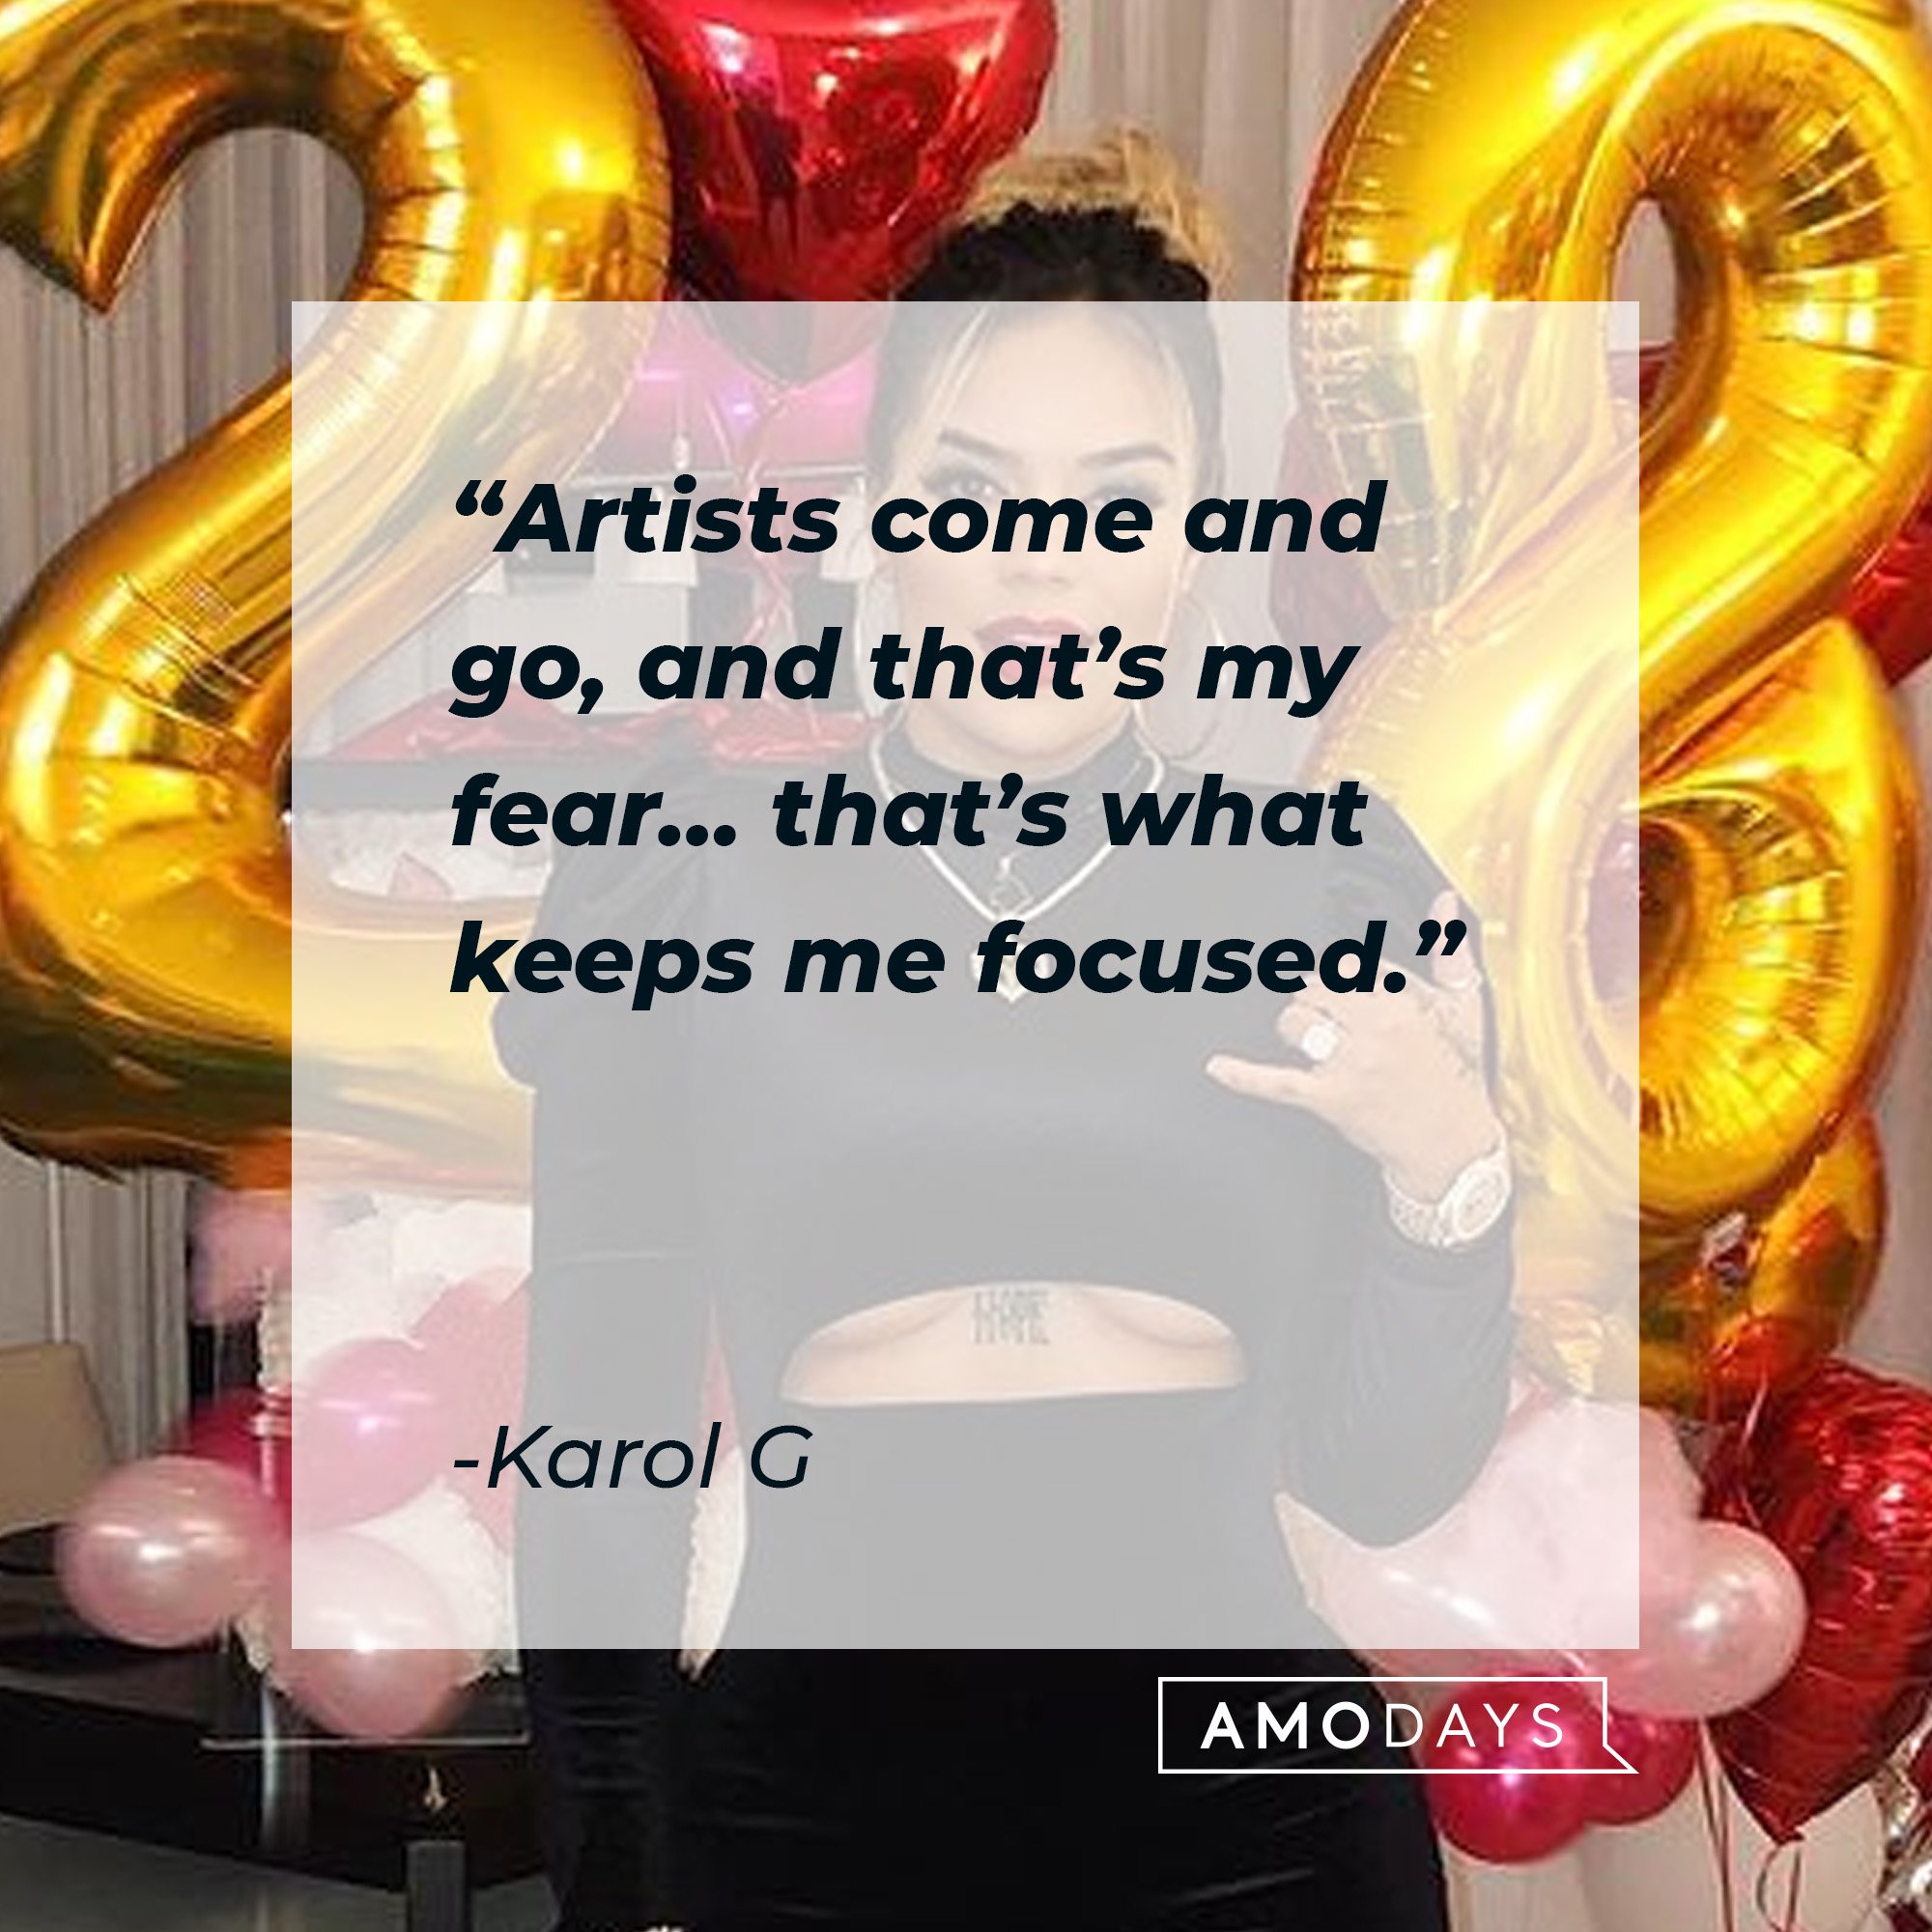  Karol G’s quote: “Artists come and go, and that's my fear… that's what keeps me focused.” | Image: AmoDays